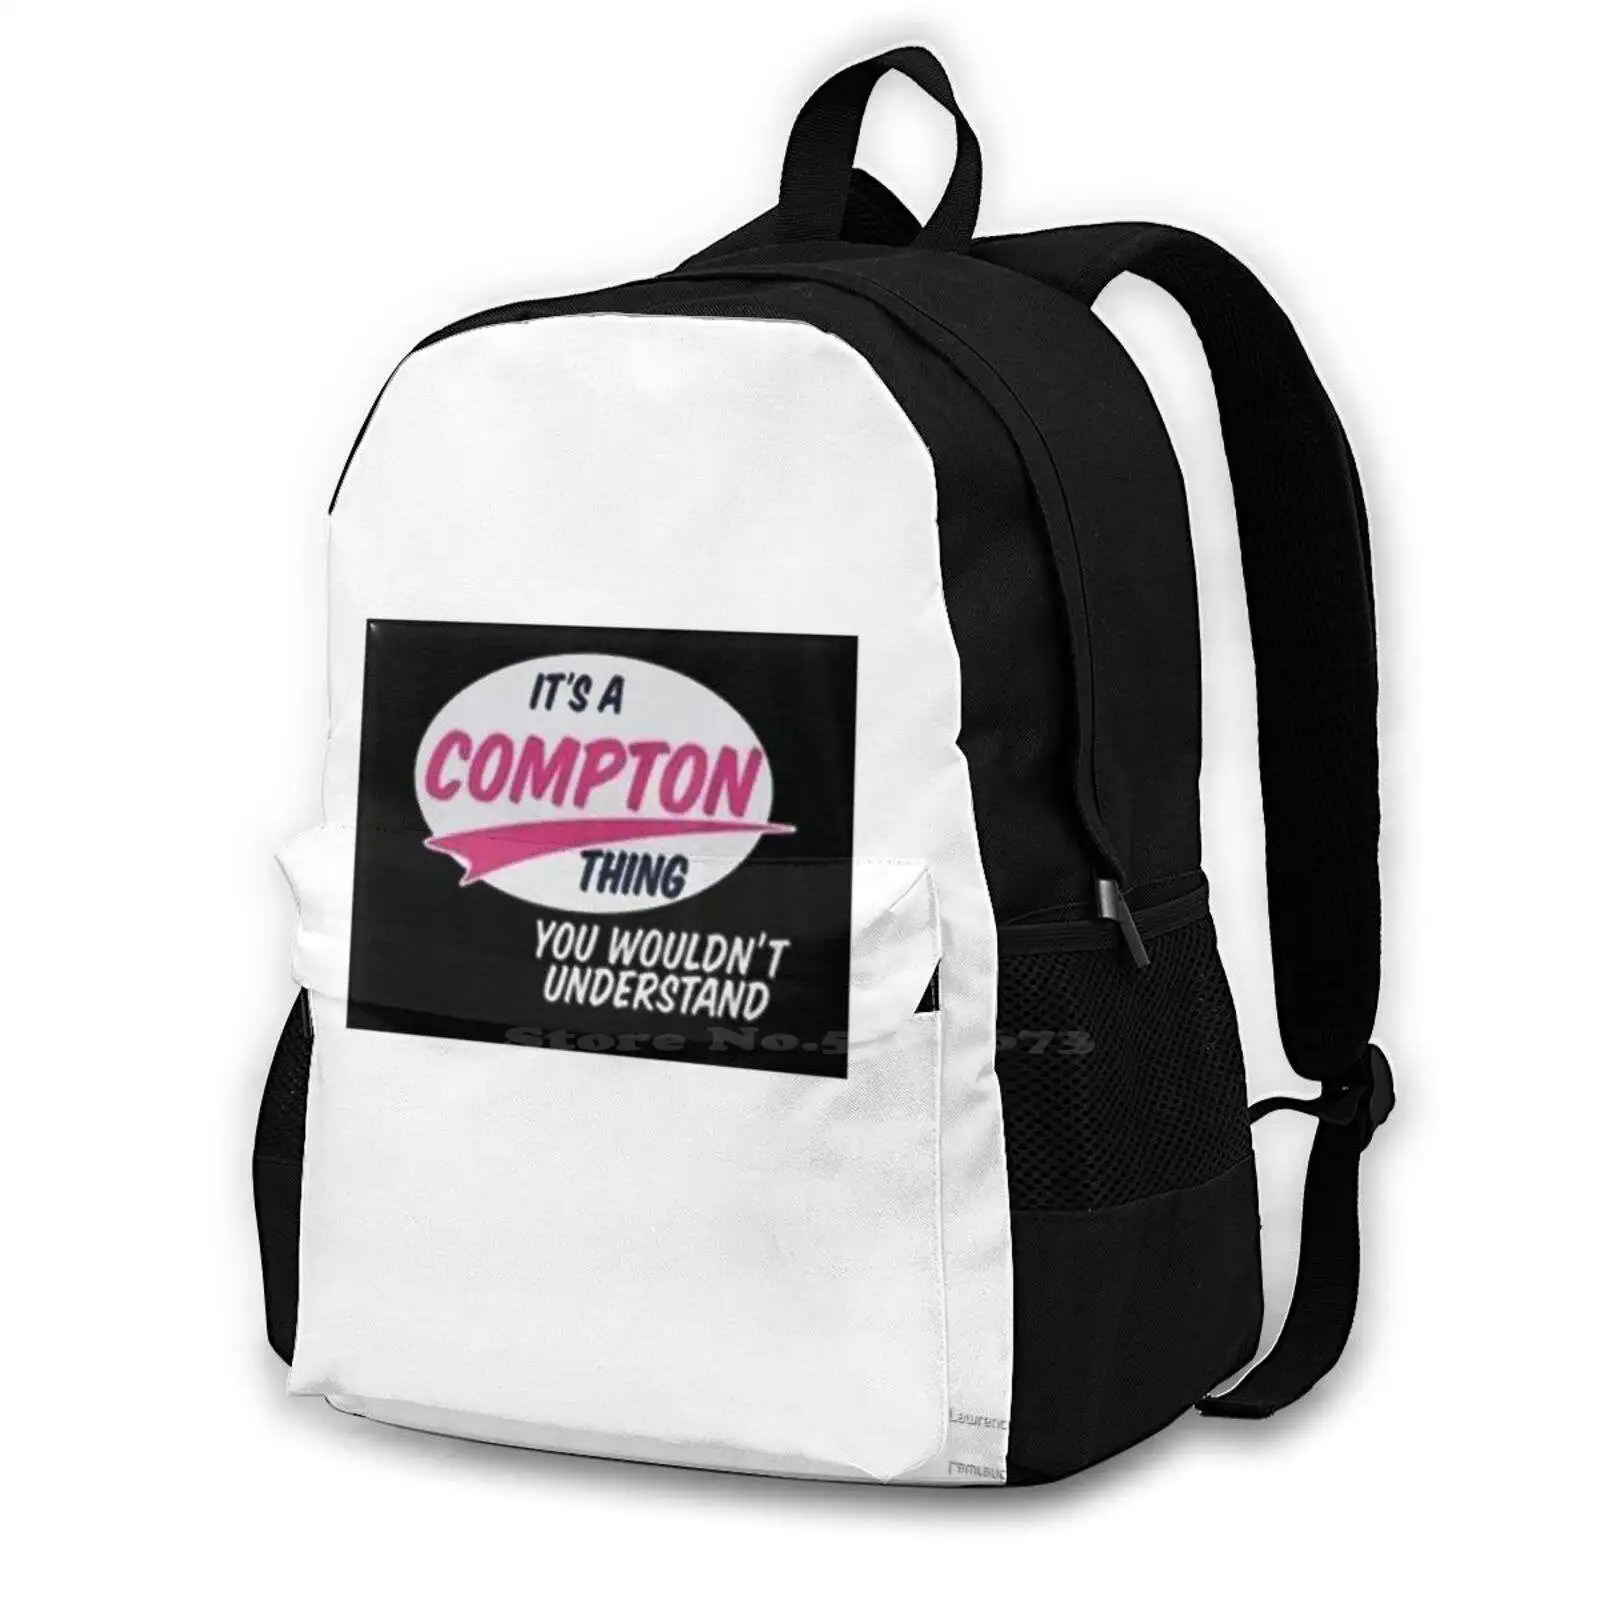 

It'S A Compton Thing School Bags For Teenage Girls Laptop Travel Bags Compton City Wouldnt Understand Rap Hip Hop Shakur